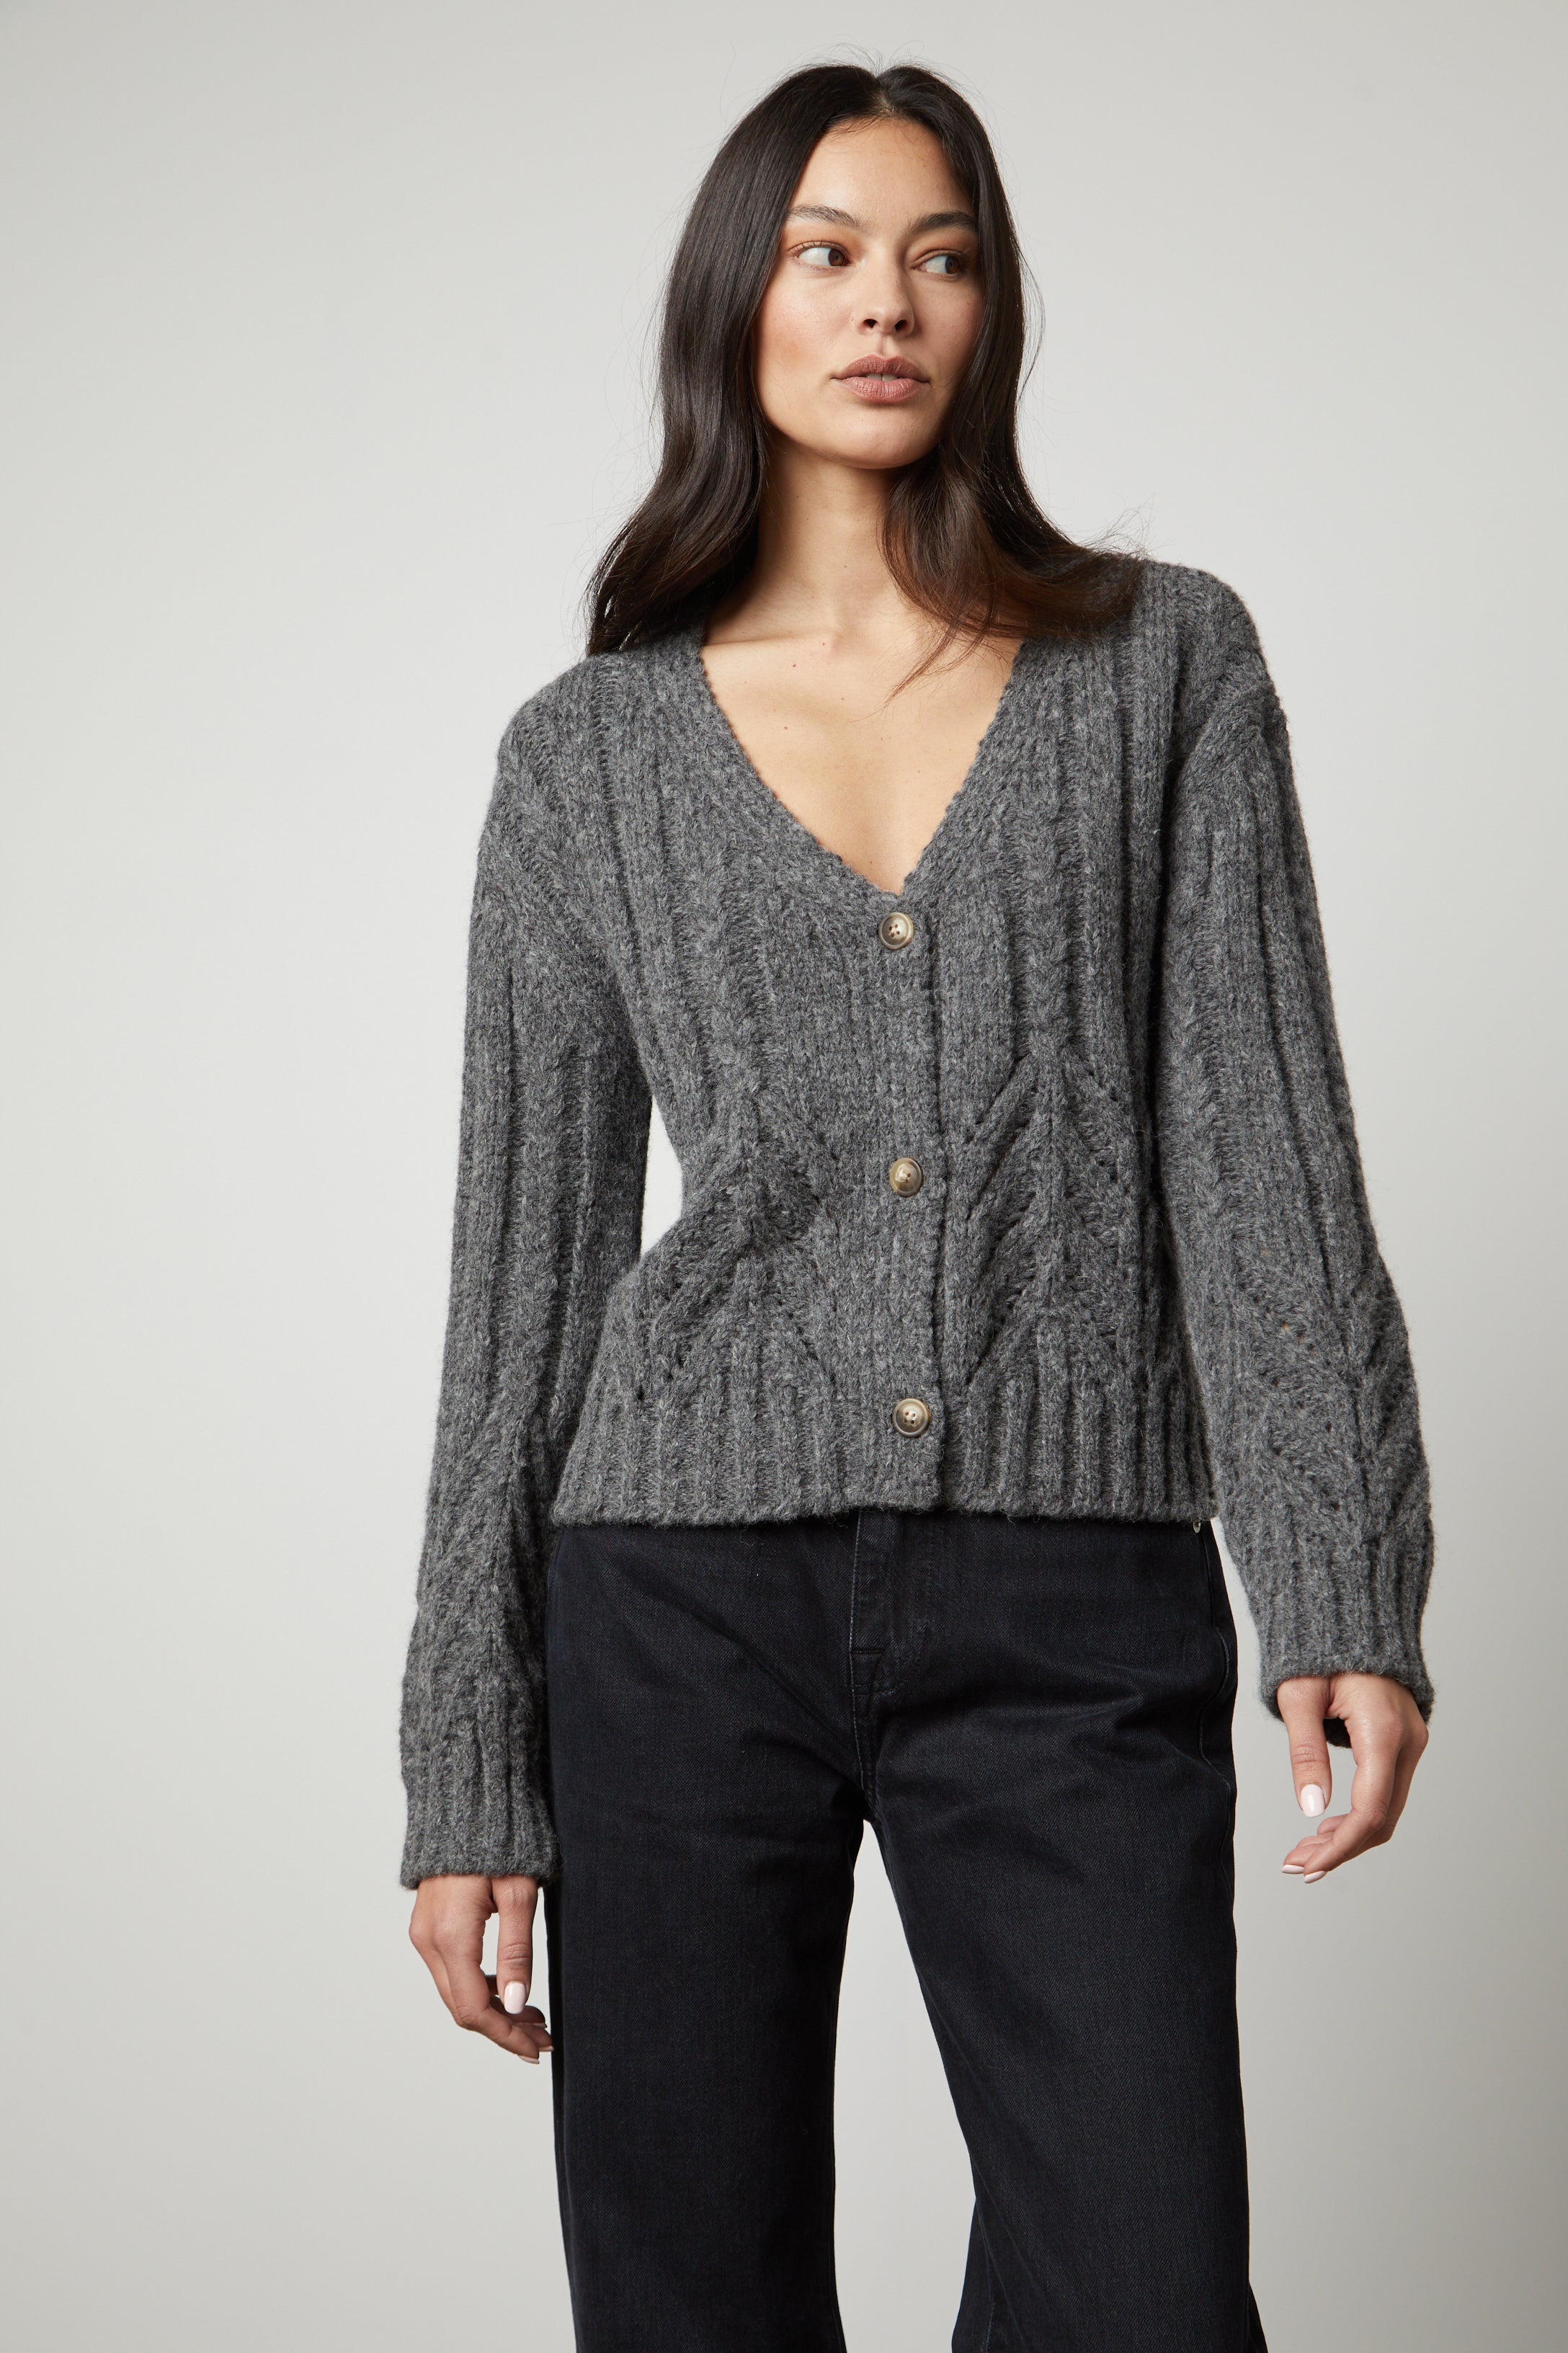   The model is wearing a Velvet by Graham & Spencer Hazel Alpaca Cable Knit Cardigan. 